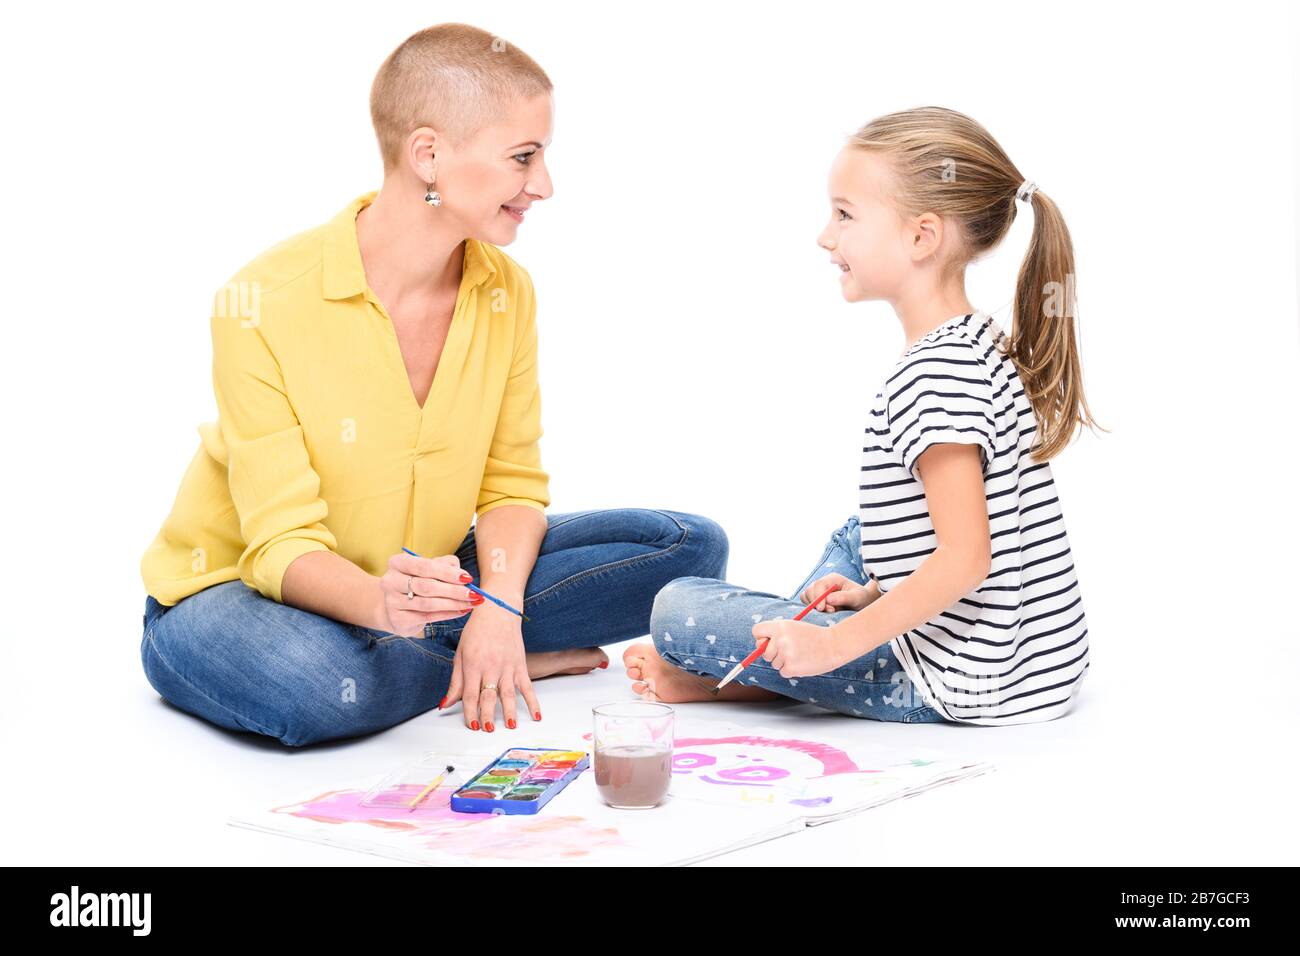 Young girl and her therapist in child occupational therapy session painting with watercolors. Child therapy concept on white background. Stock Photo